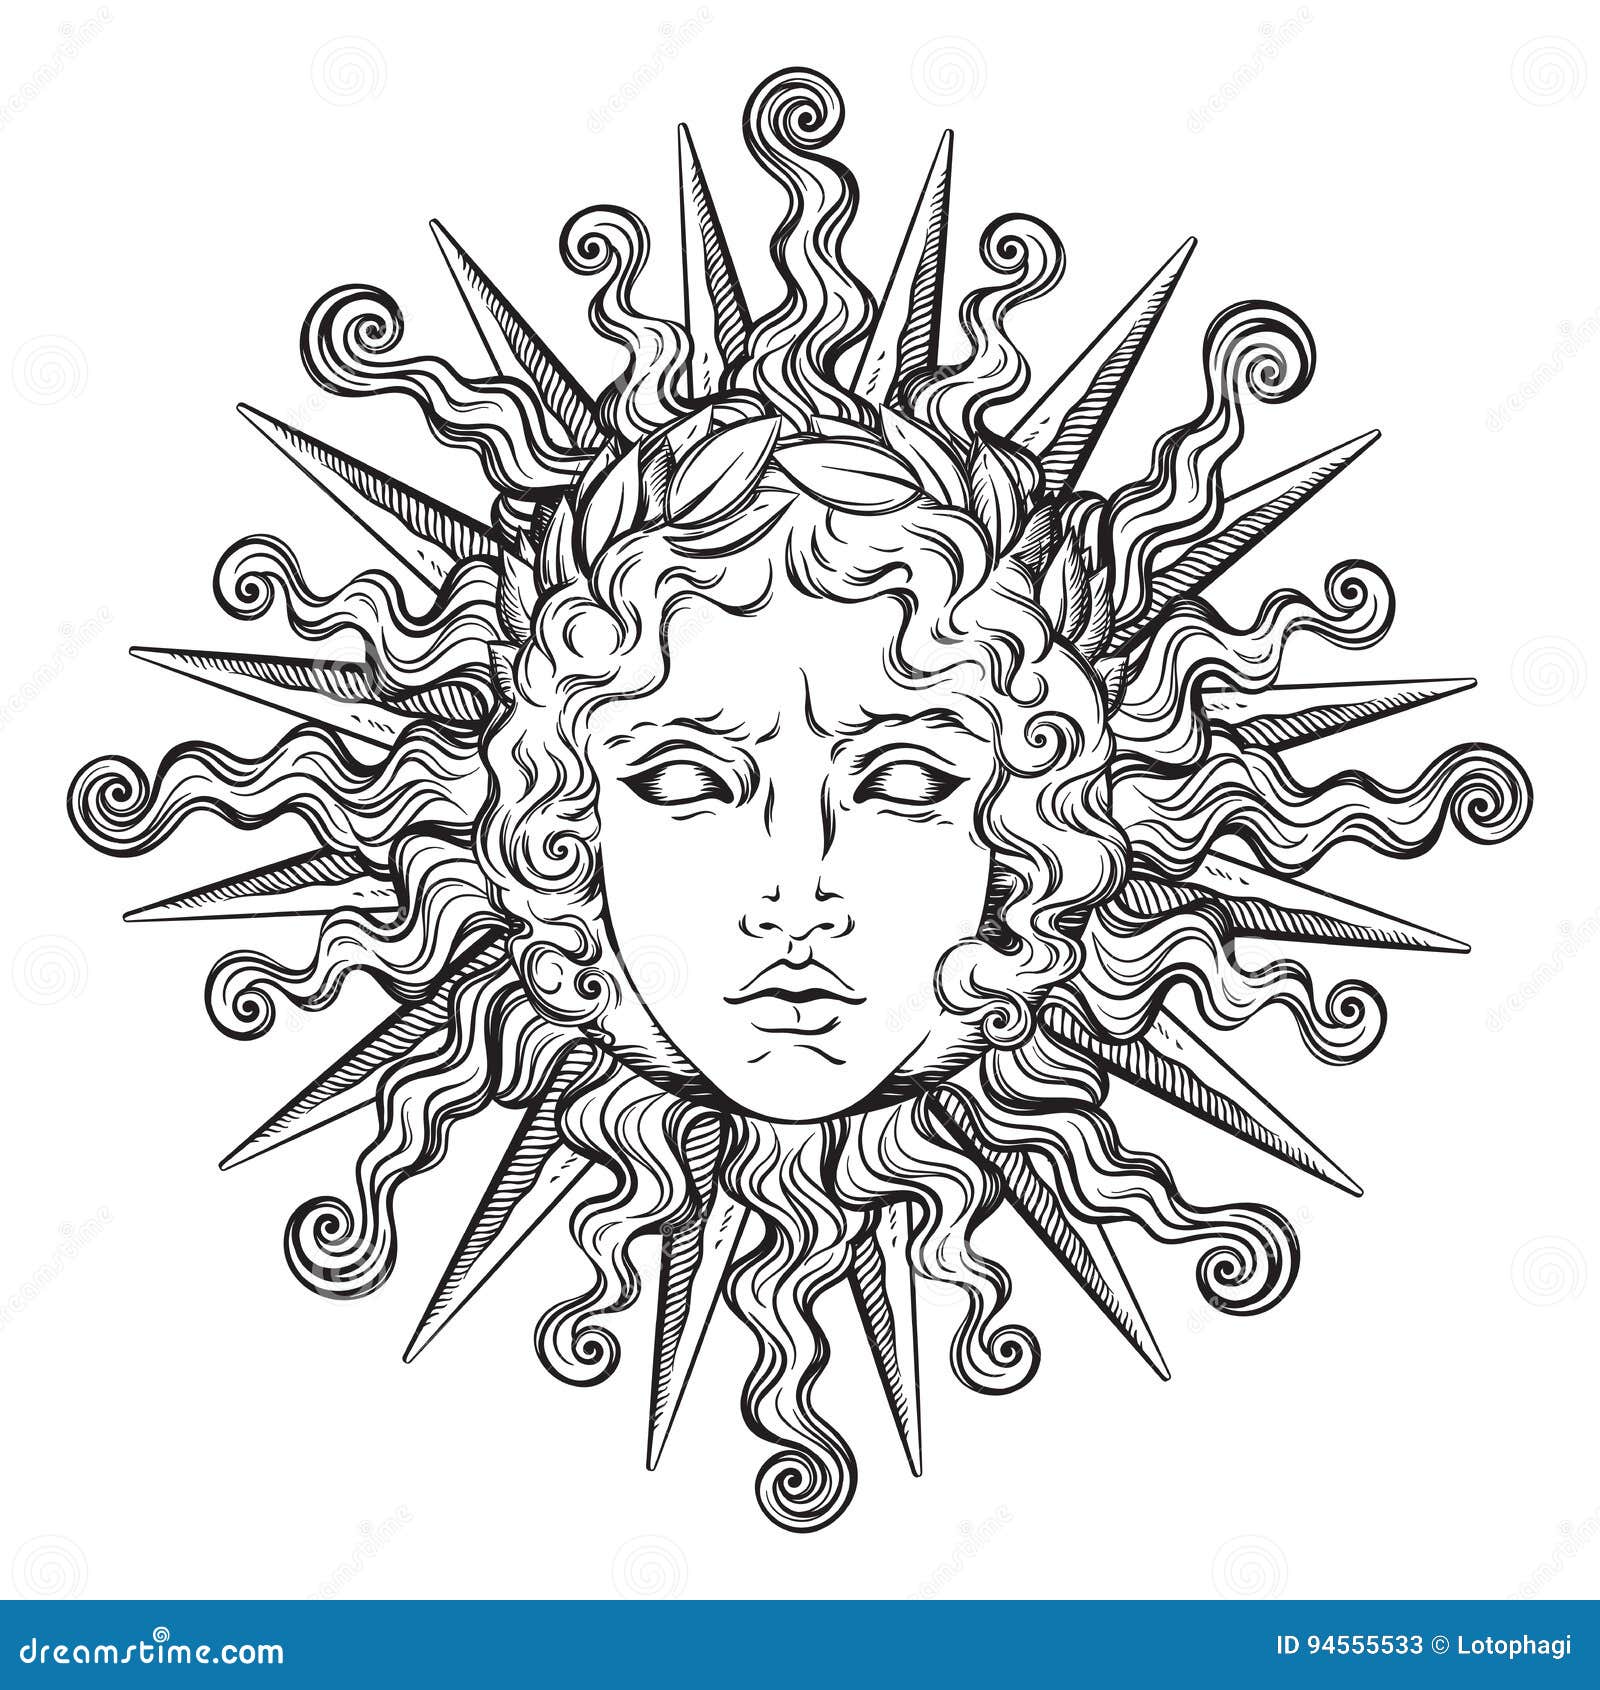 hand drawn antique style sun with face of the greek and roman god apollo. flash tattoo or print   